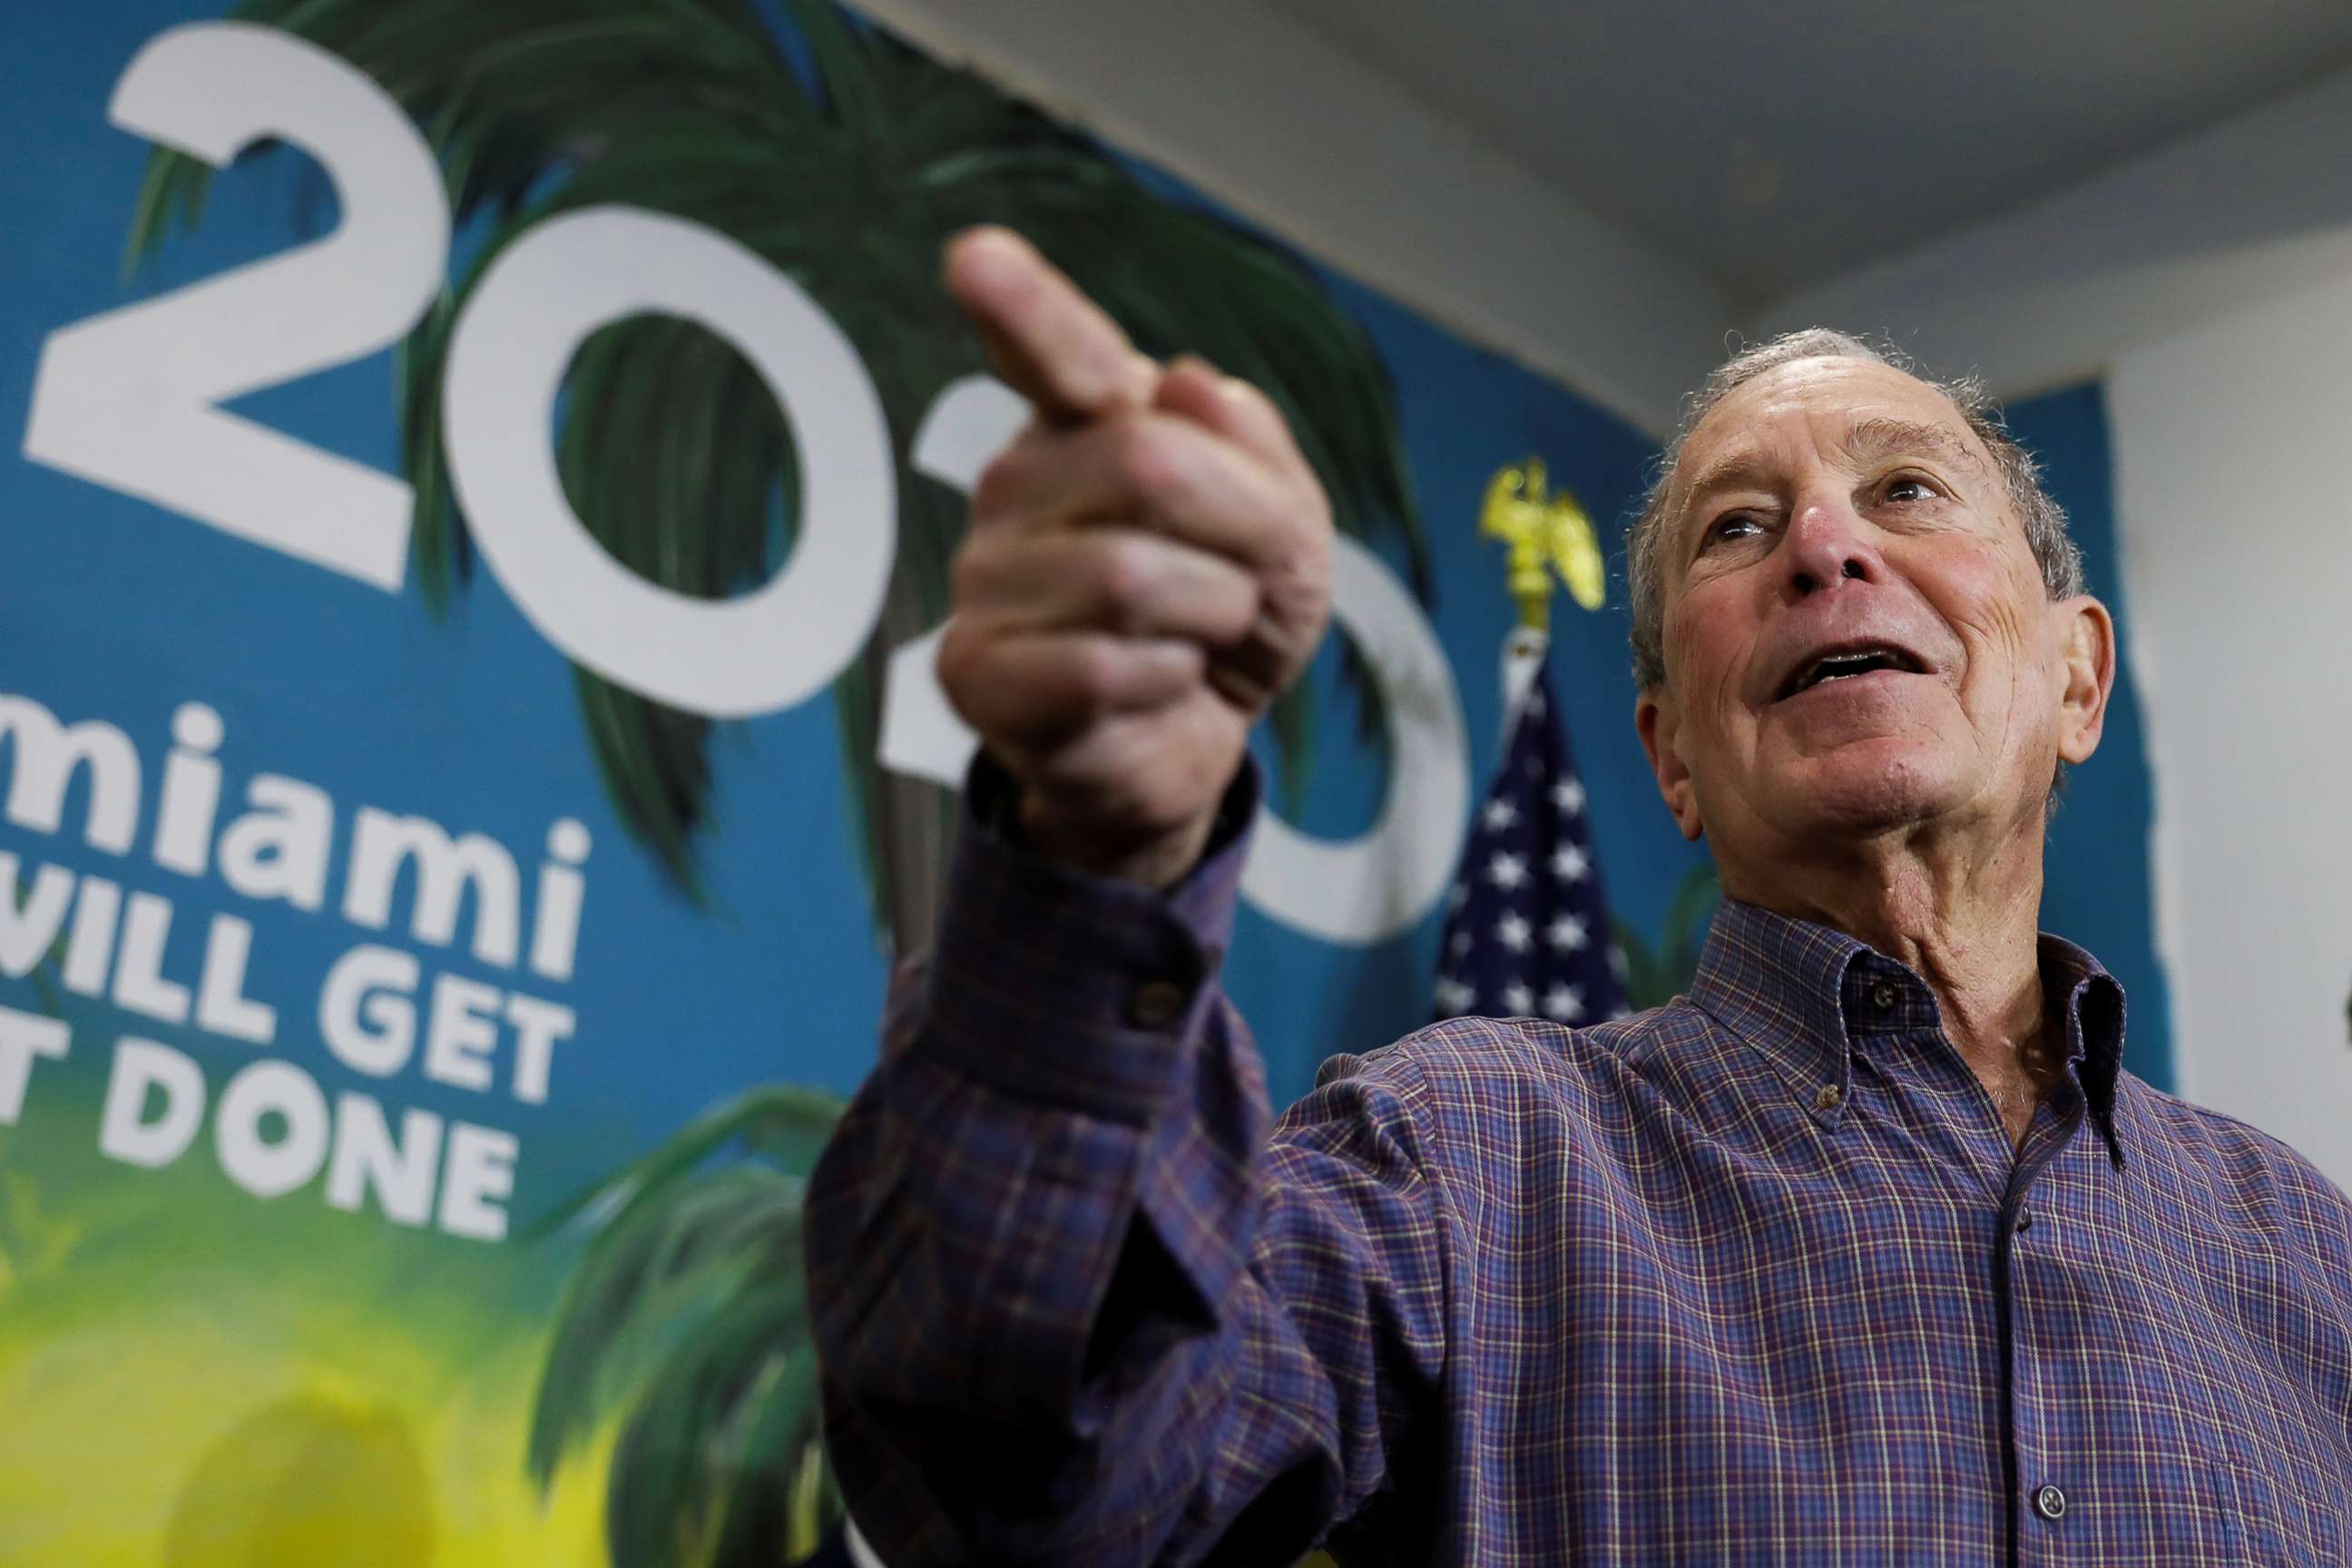 PHOTO: Democratic presidential candidate Michael Bloomberg speaks during a press conference at his campaign office in Little Havana, Miami, March 3, 2020.